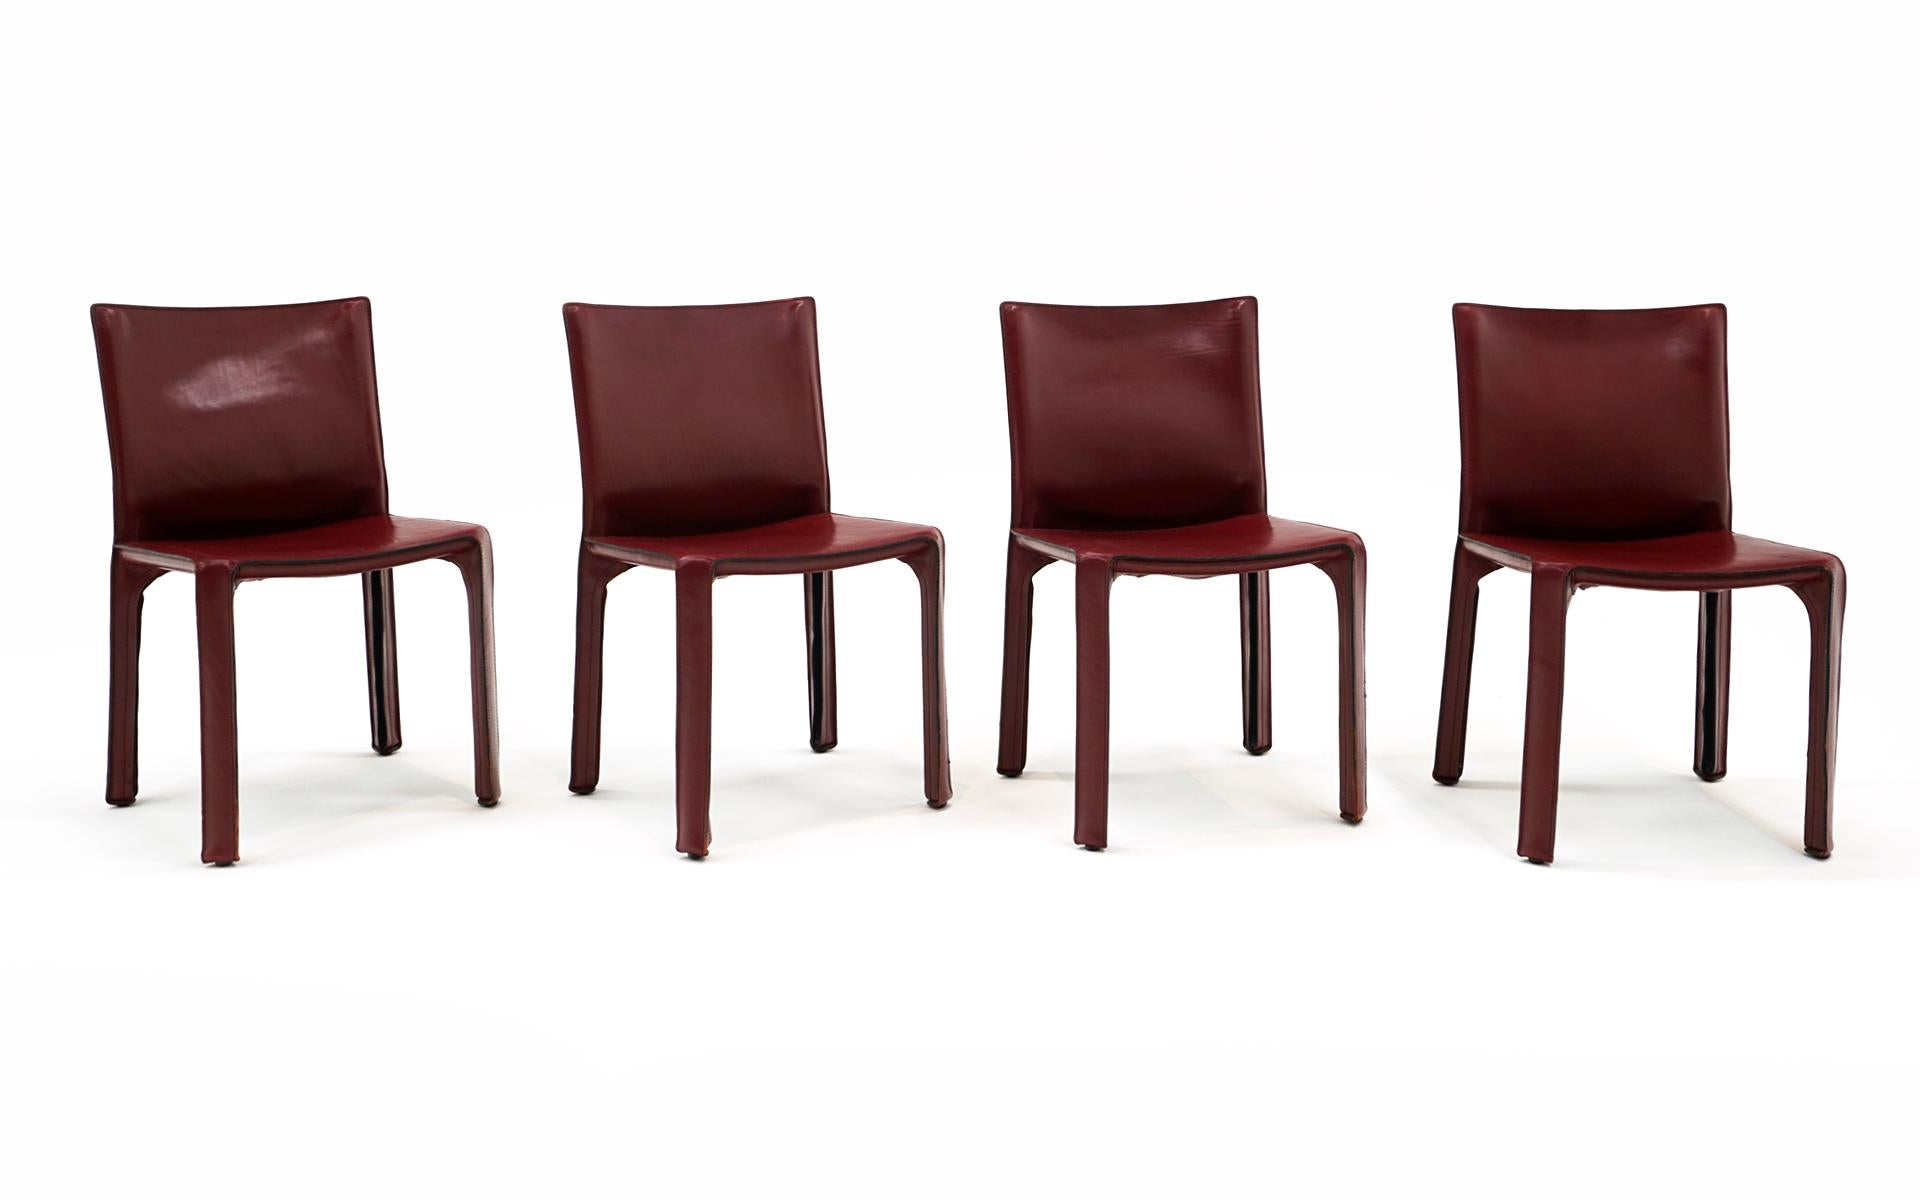 Early set of 4 CAB Chairs designed by Mario Bellini for Cassina, 1970s.  Burgundy / deep red / oxblood leather.  Some wear to edges, but overall very good condition.  These have been in the same seldom used residence since they were new in the late